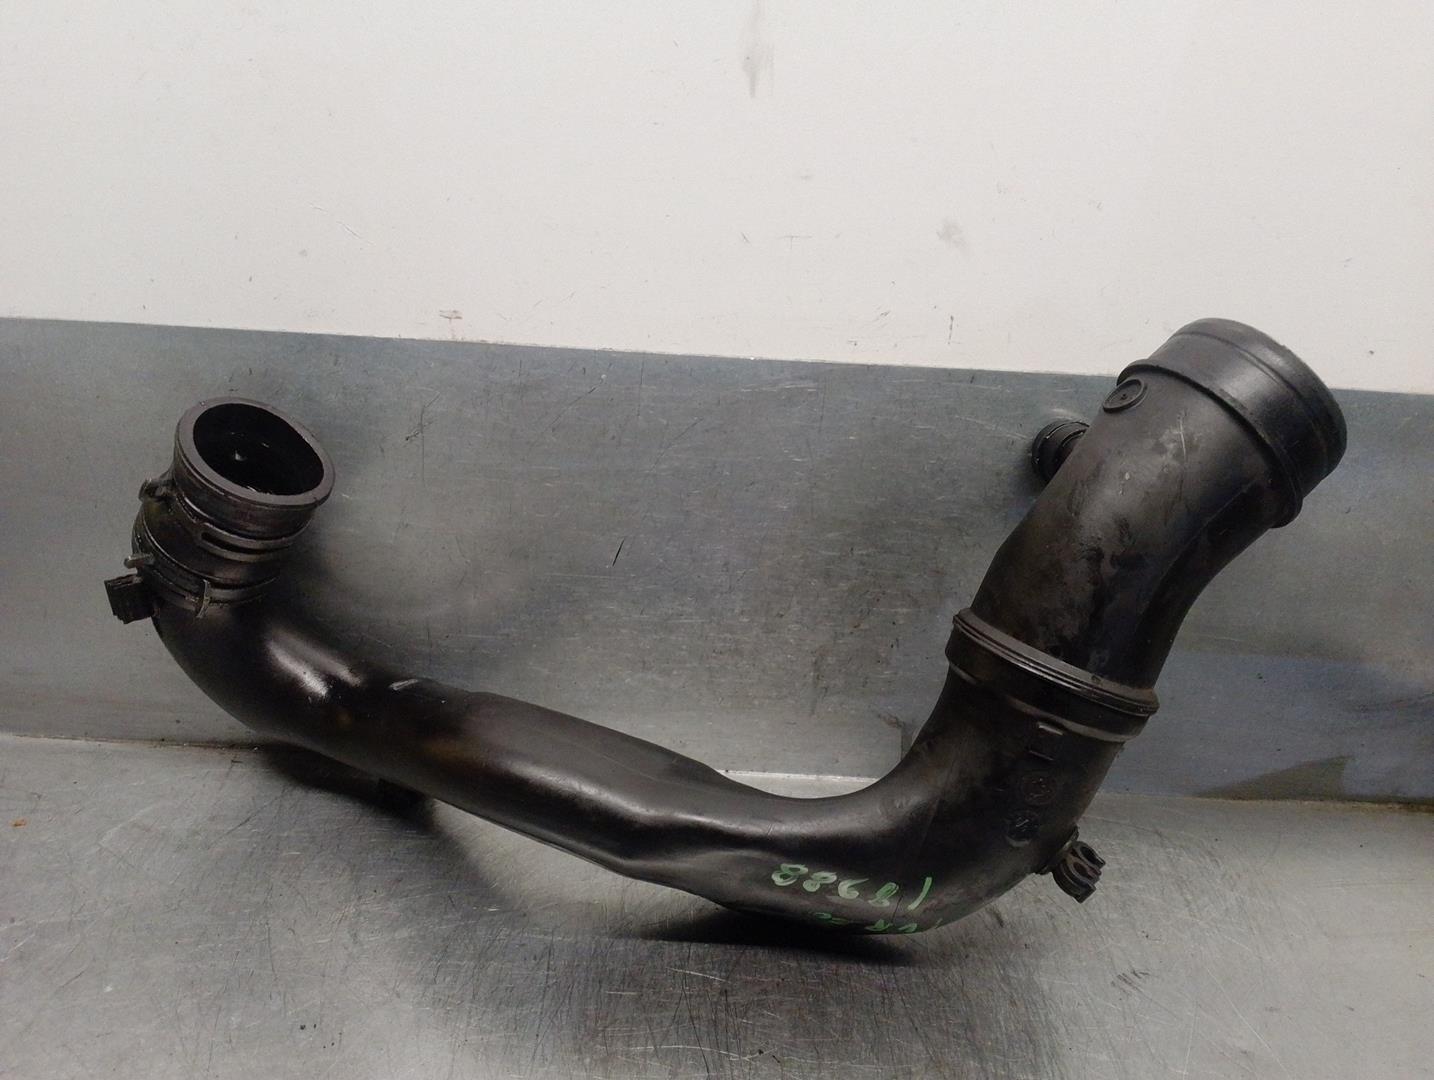 SEAT Leon 1 generation (1999-2005) Other tubes 01J0129654S, PX0446037 21733065